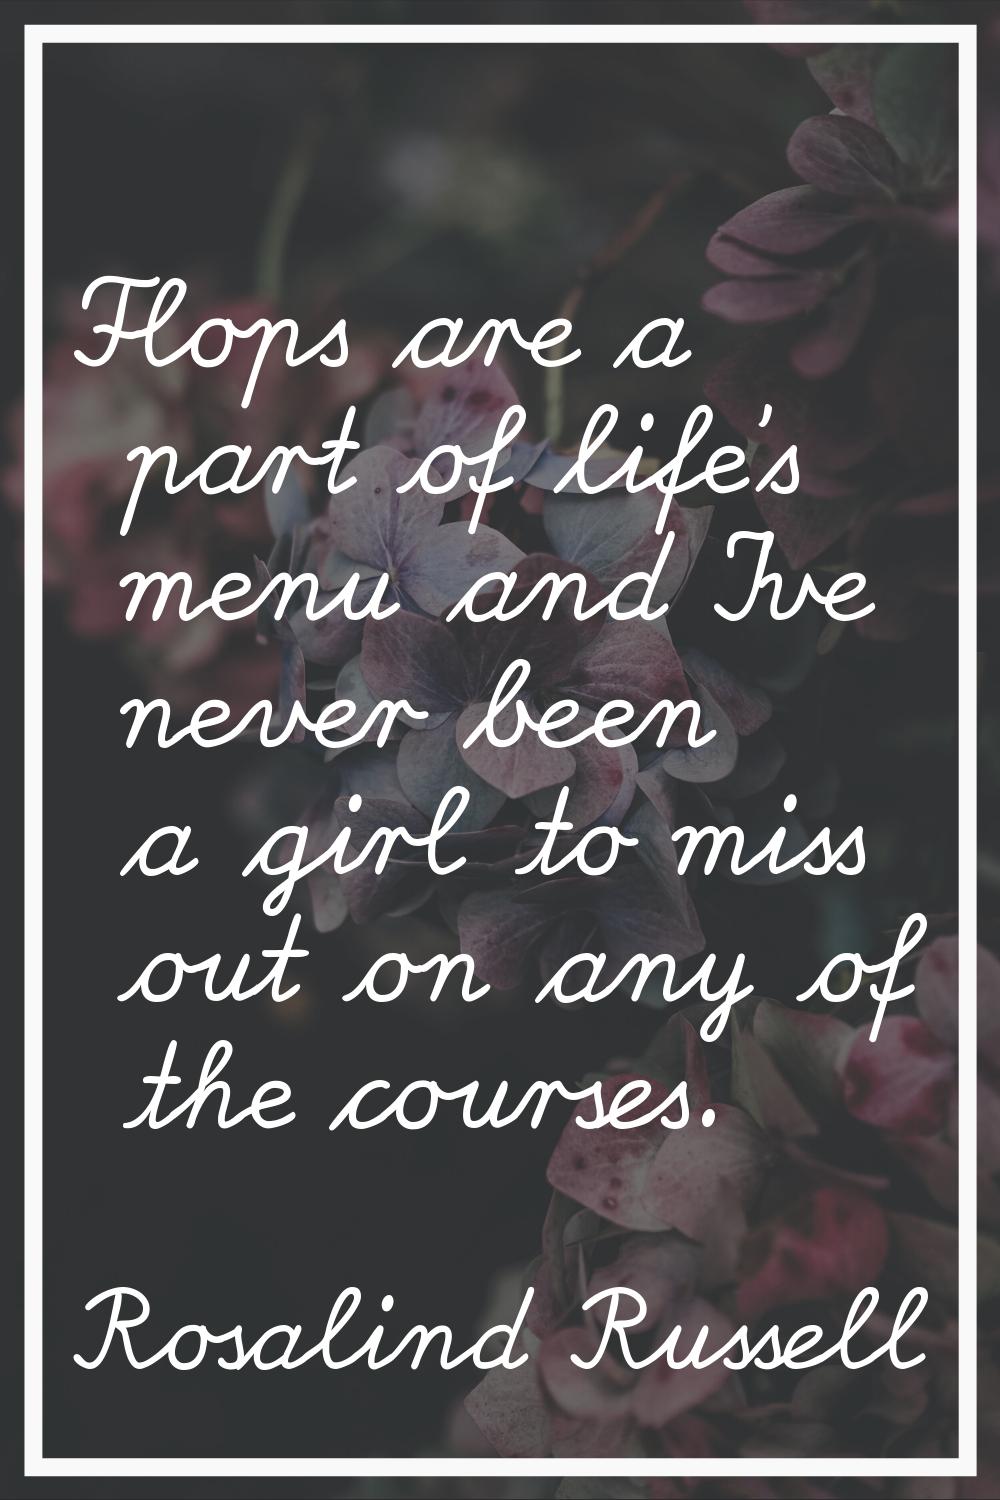 Flops are a part of life's menu and I've never been a girl to miss out on any of the courses.